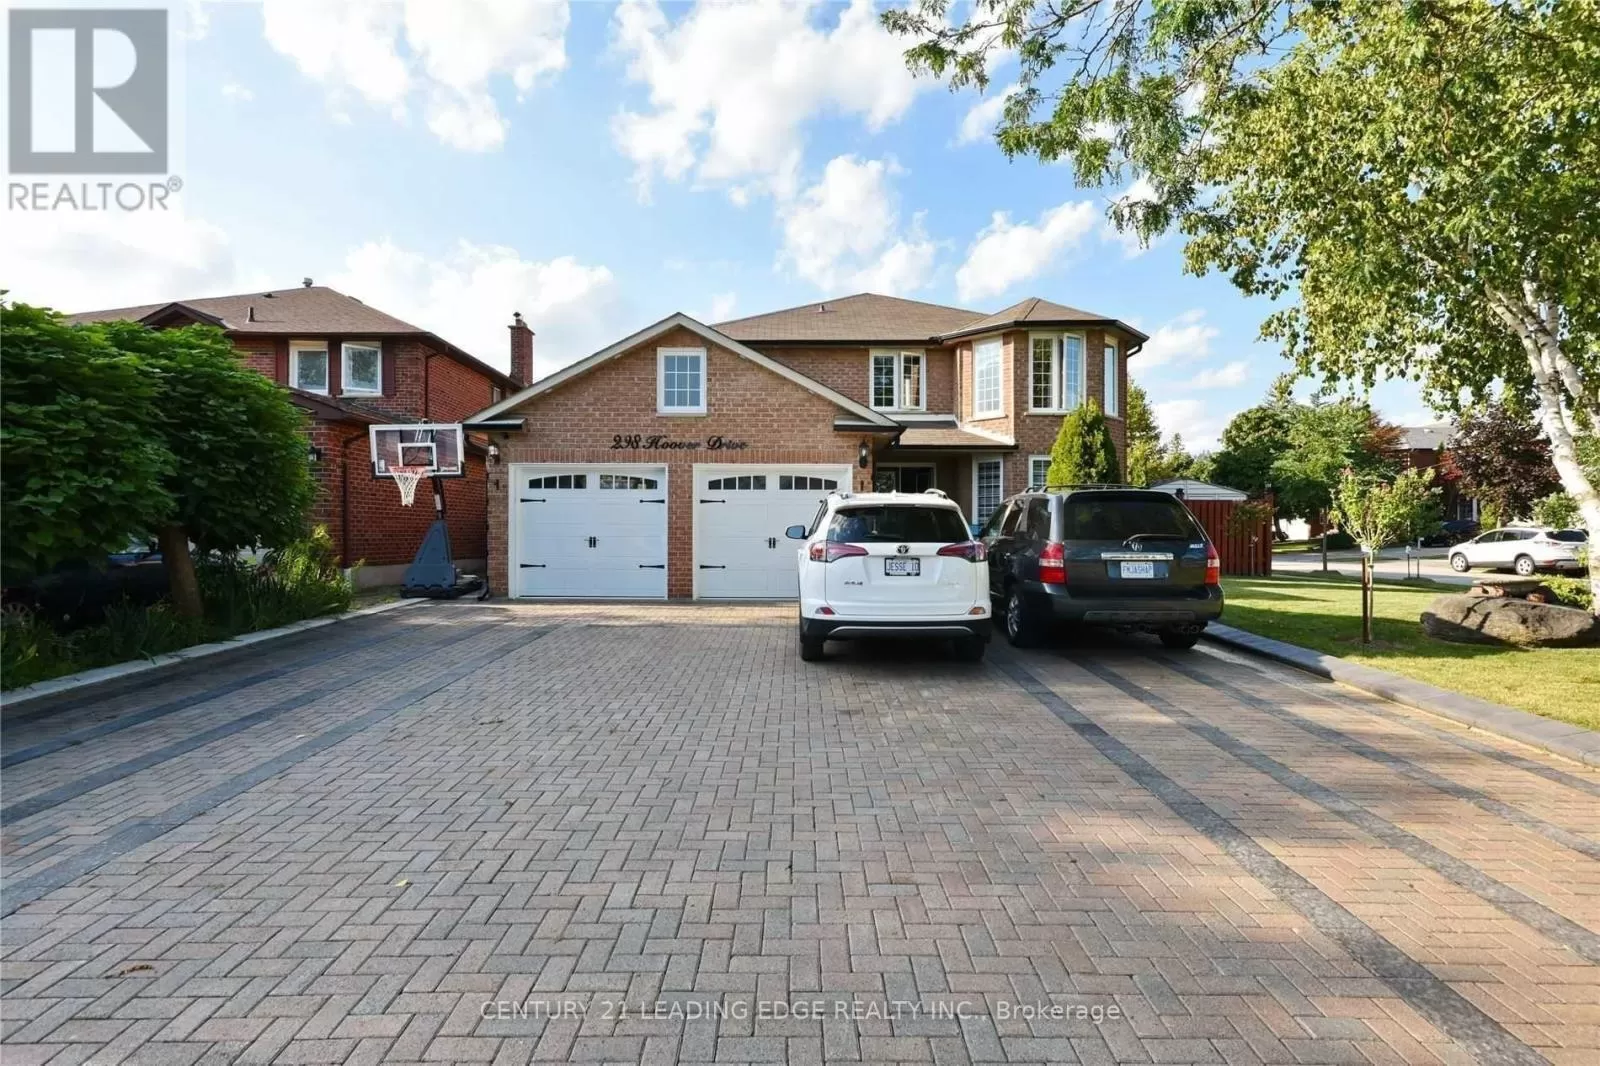 House for rent: 298 Hoover Drive, Pickering, Ontario L1V 5S1